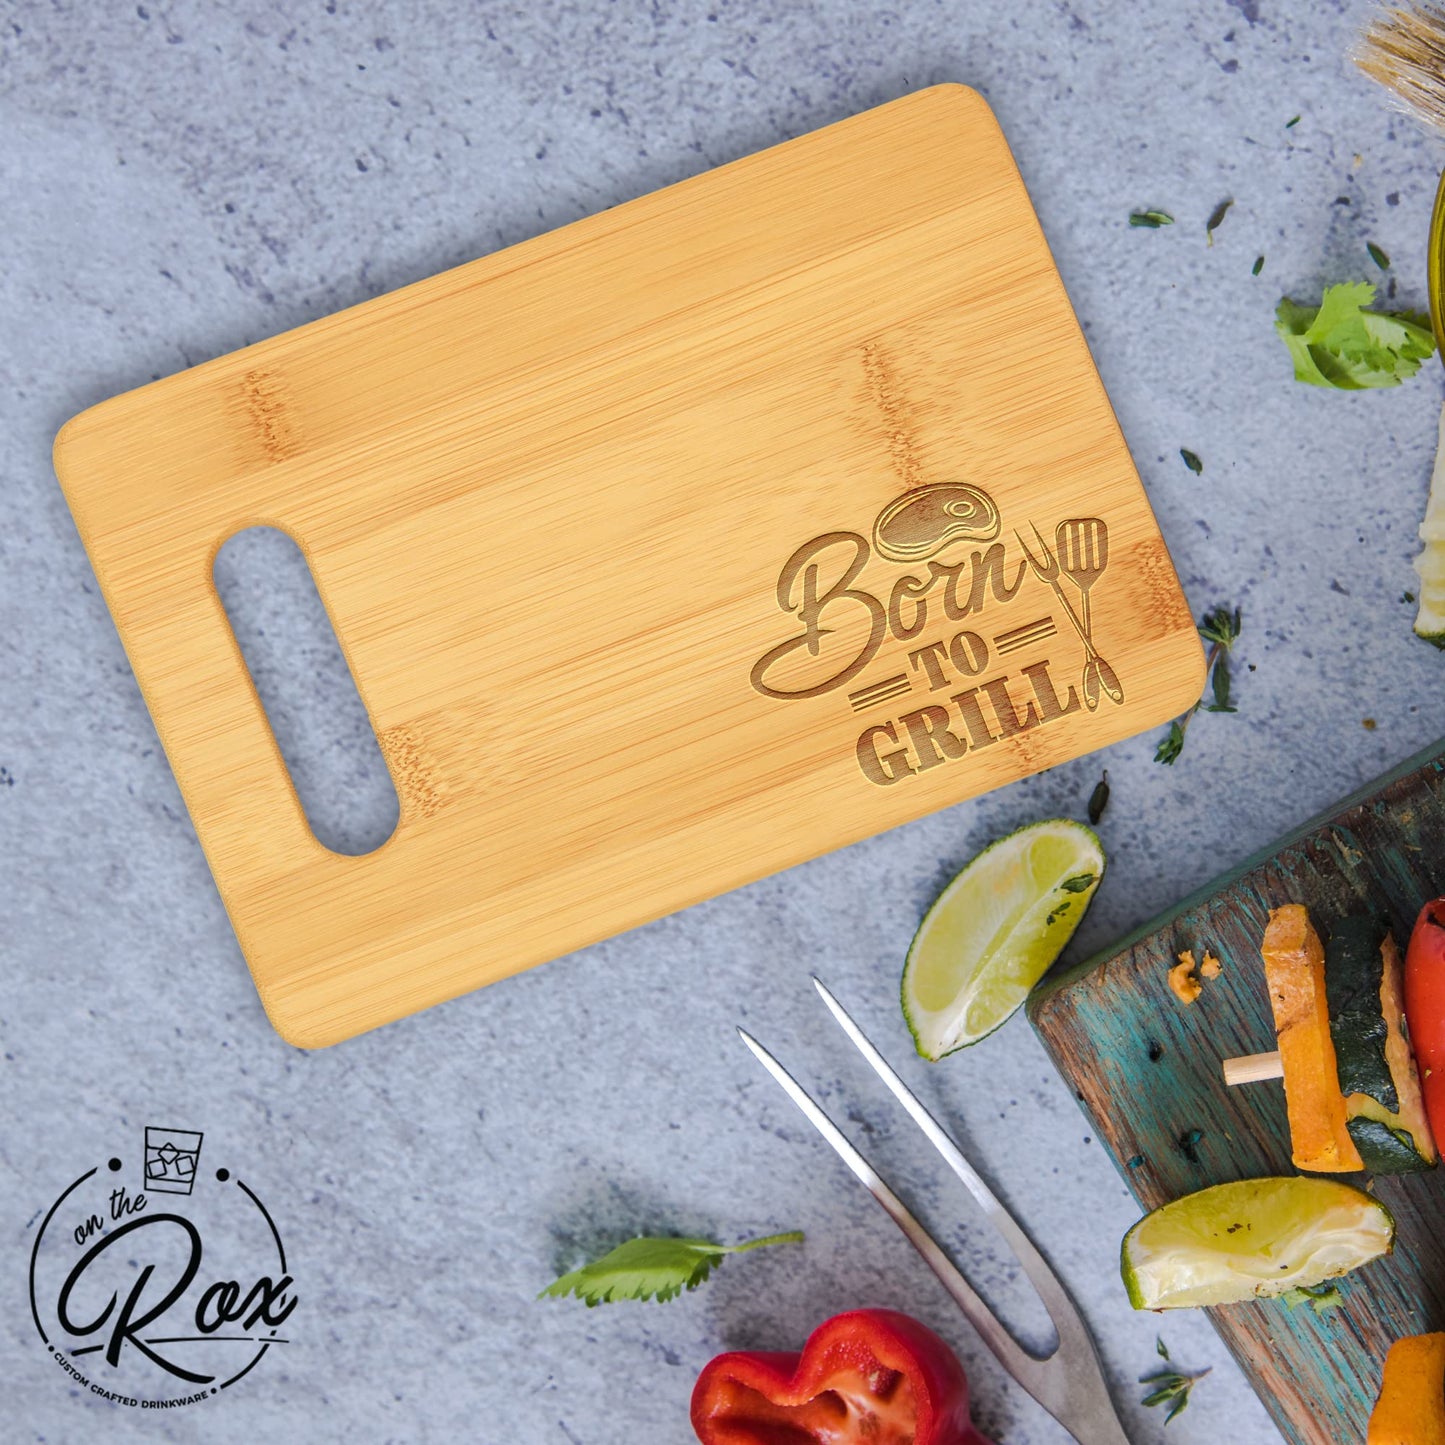 On The Rox Gifts for Dad - Born To Grill Cutting Board (9”x6”) - Personalized Dad Gifts for Men - Engraved Bamboo Board for Grill Fathers, Papa, Stepdad -  Best Dad Ever Birthday, Fathers' Day Gifts